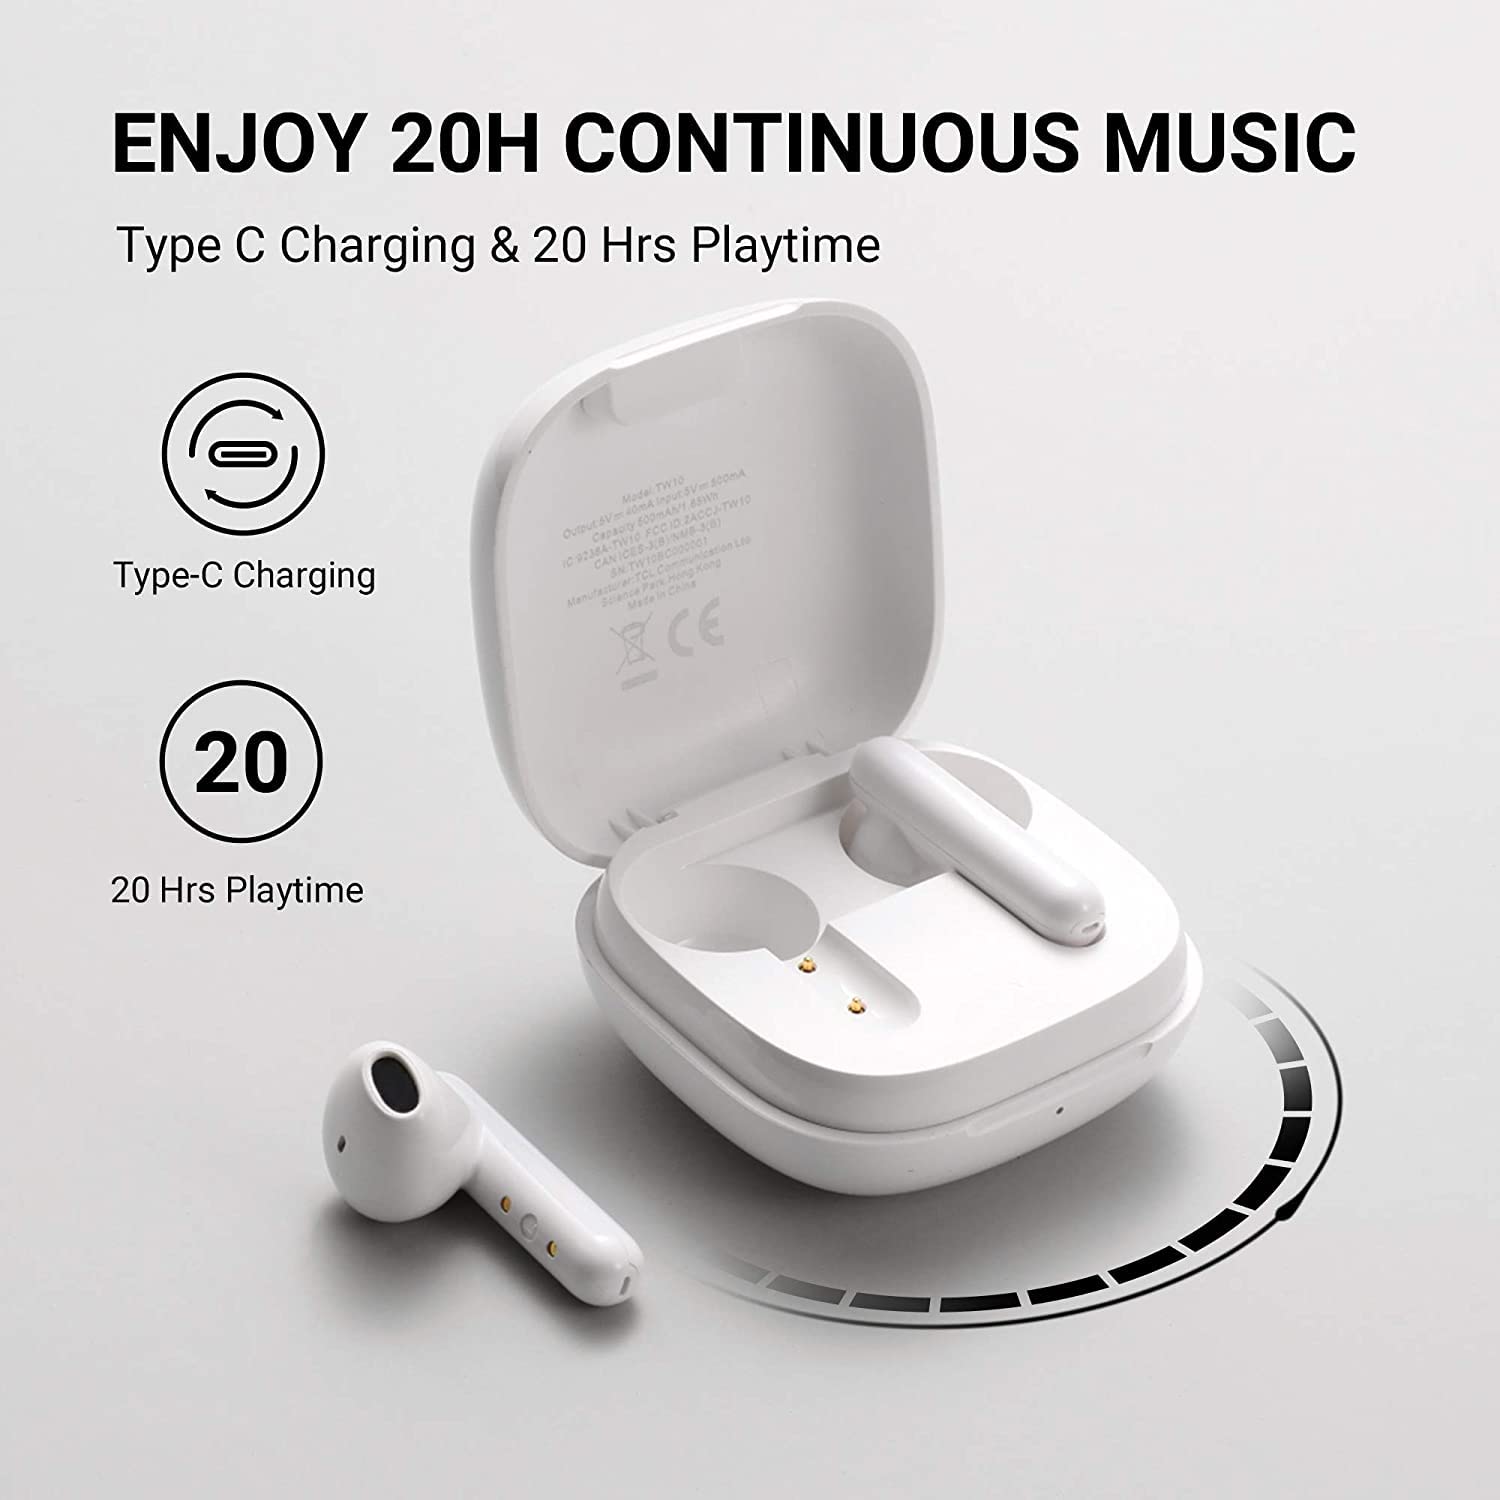 TCL S150 True Wireless Earbuds, Deep Bass with 13mm Drivers, Bluetooth 5.0 Headphones, Type C Charging Case, Noise Isolation, Waterproof Touch Control Wireless Earphones with Mic for Work, White